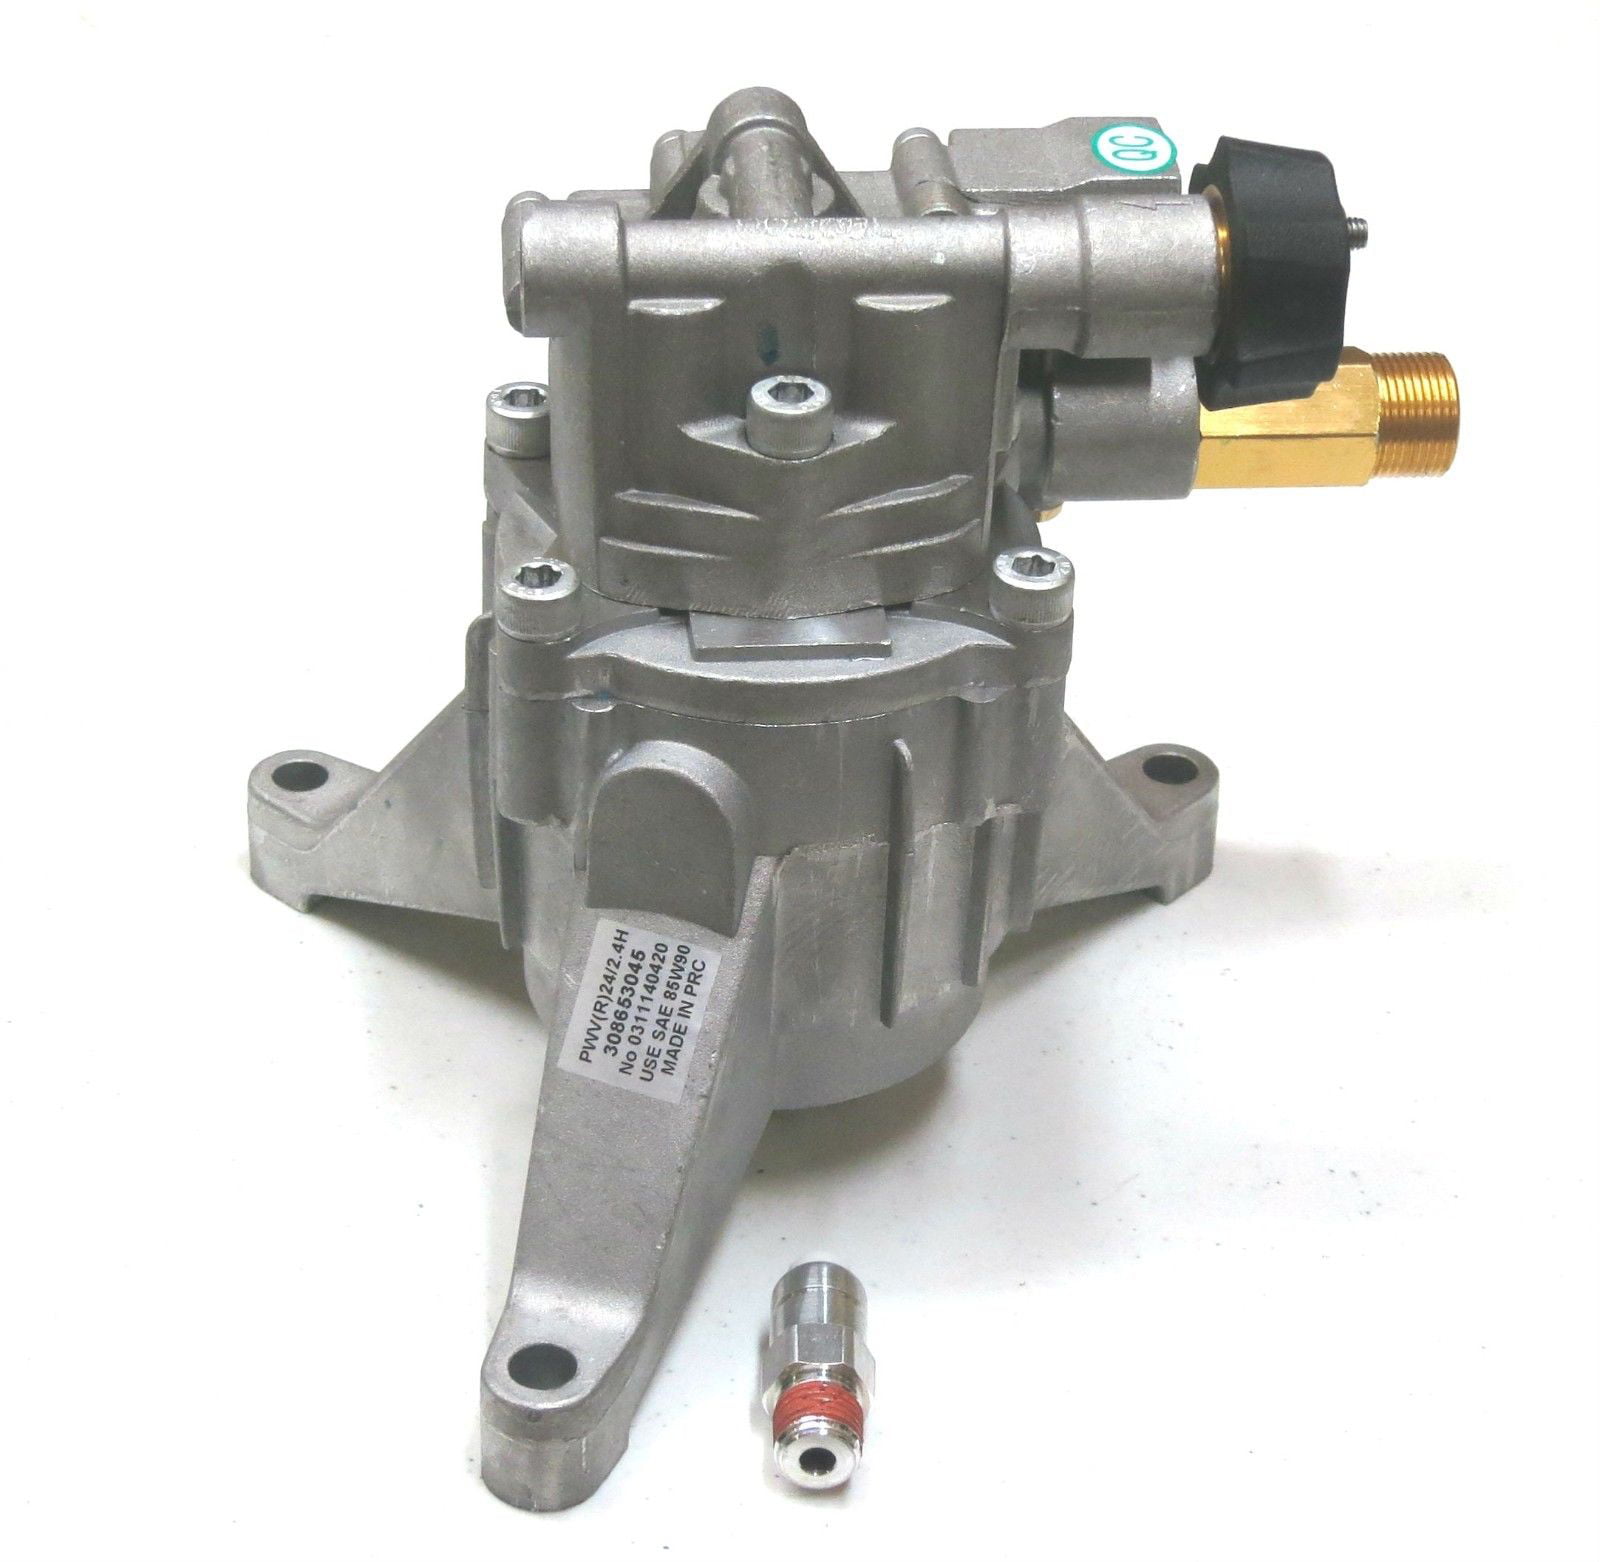 2800 psi POWER PRESSURE WASHER WATER PUMP  Excell Devilbiss  PWH2500  DTH2450 